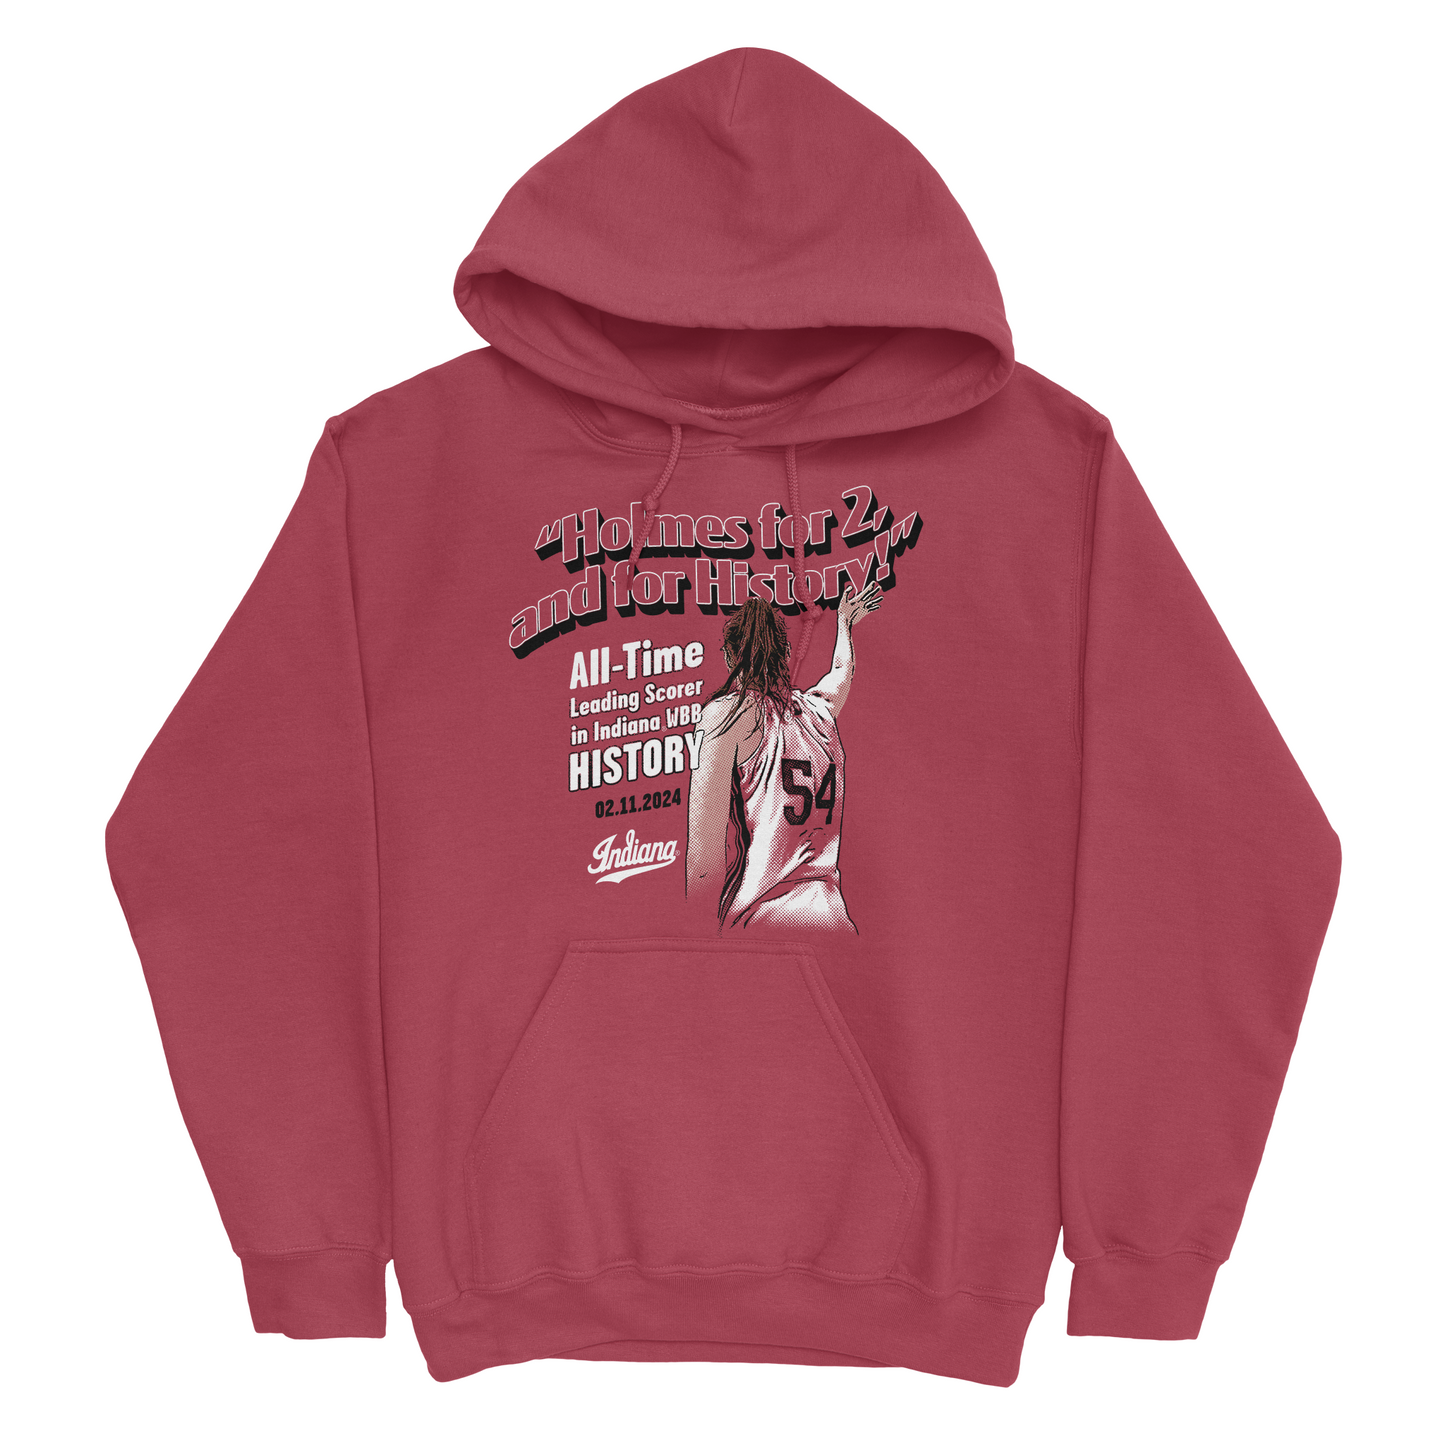 EXCLUSIVE RELEASE: Mackenzie Holmes - Indiana WBB All Time Leading Scorer Hoodie